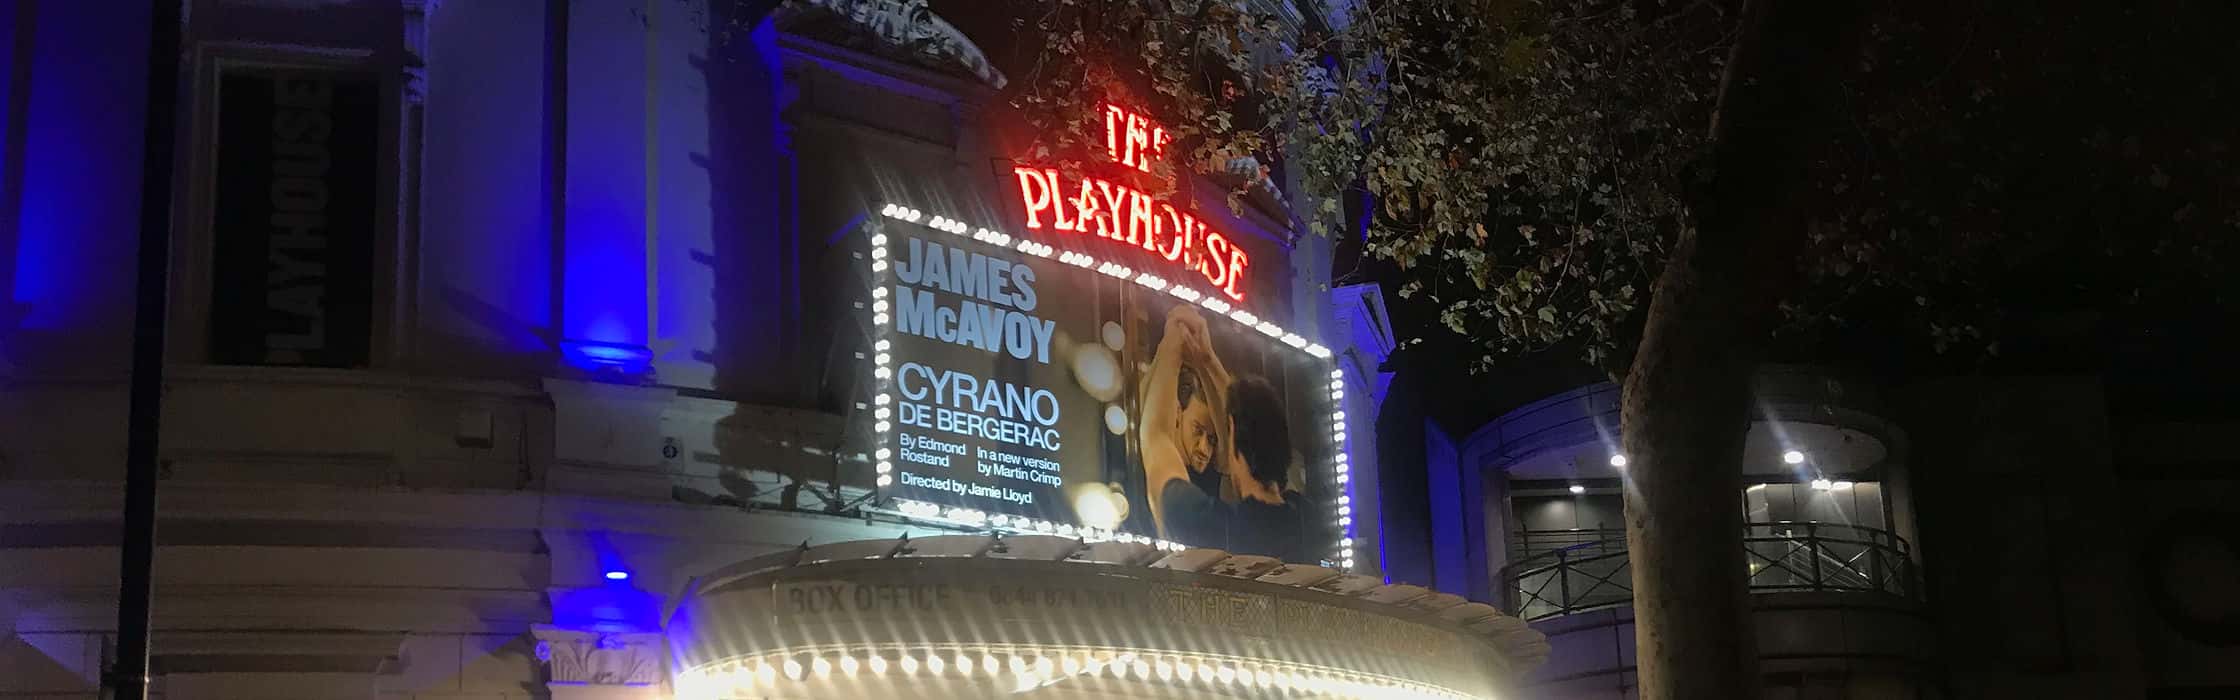 What's On at The Playhouse Theatre, London